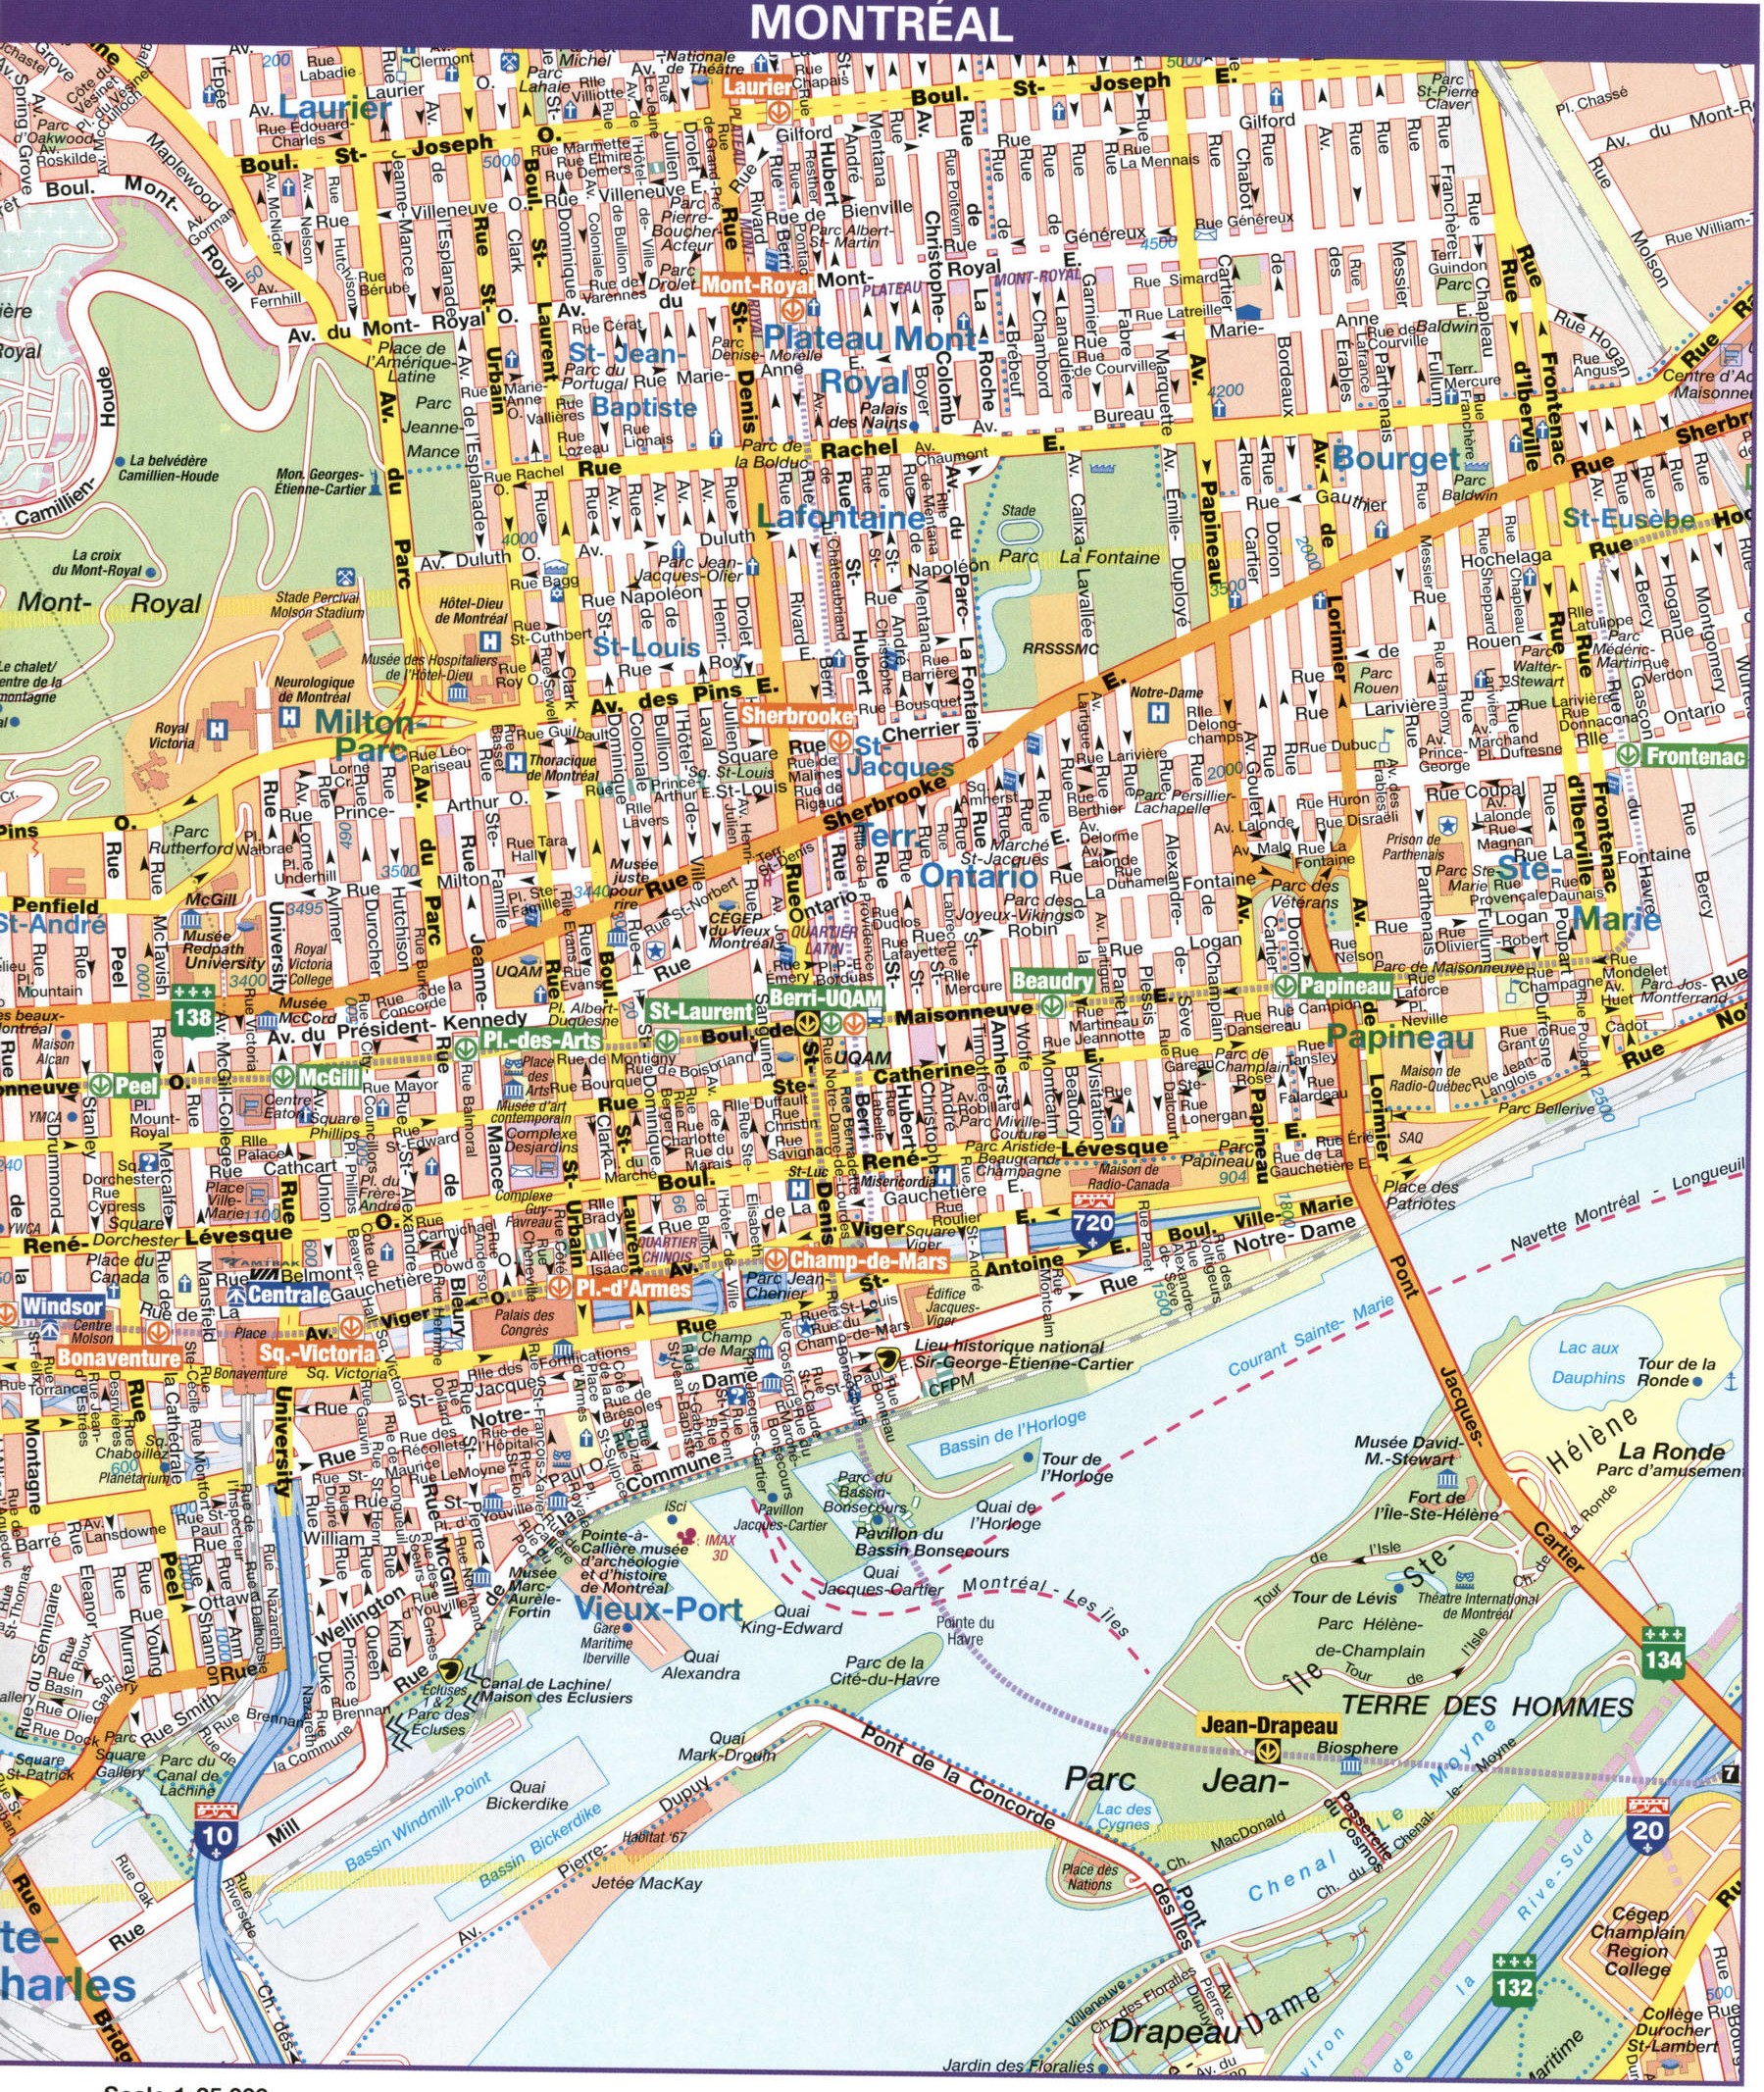 Montreal roads map